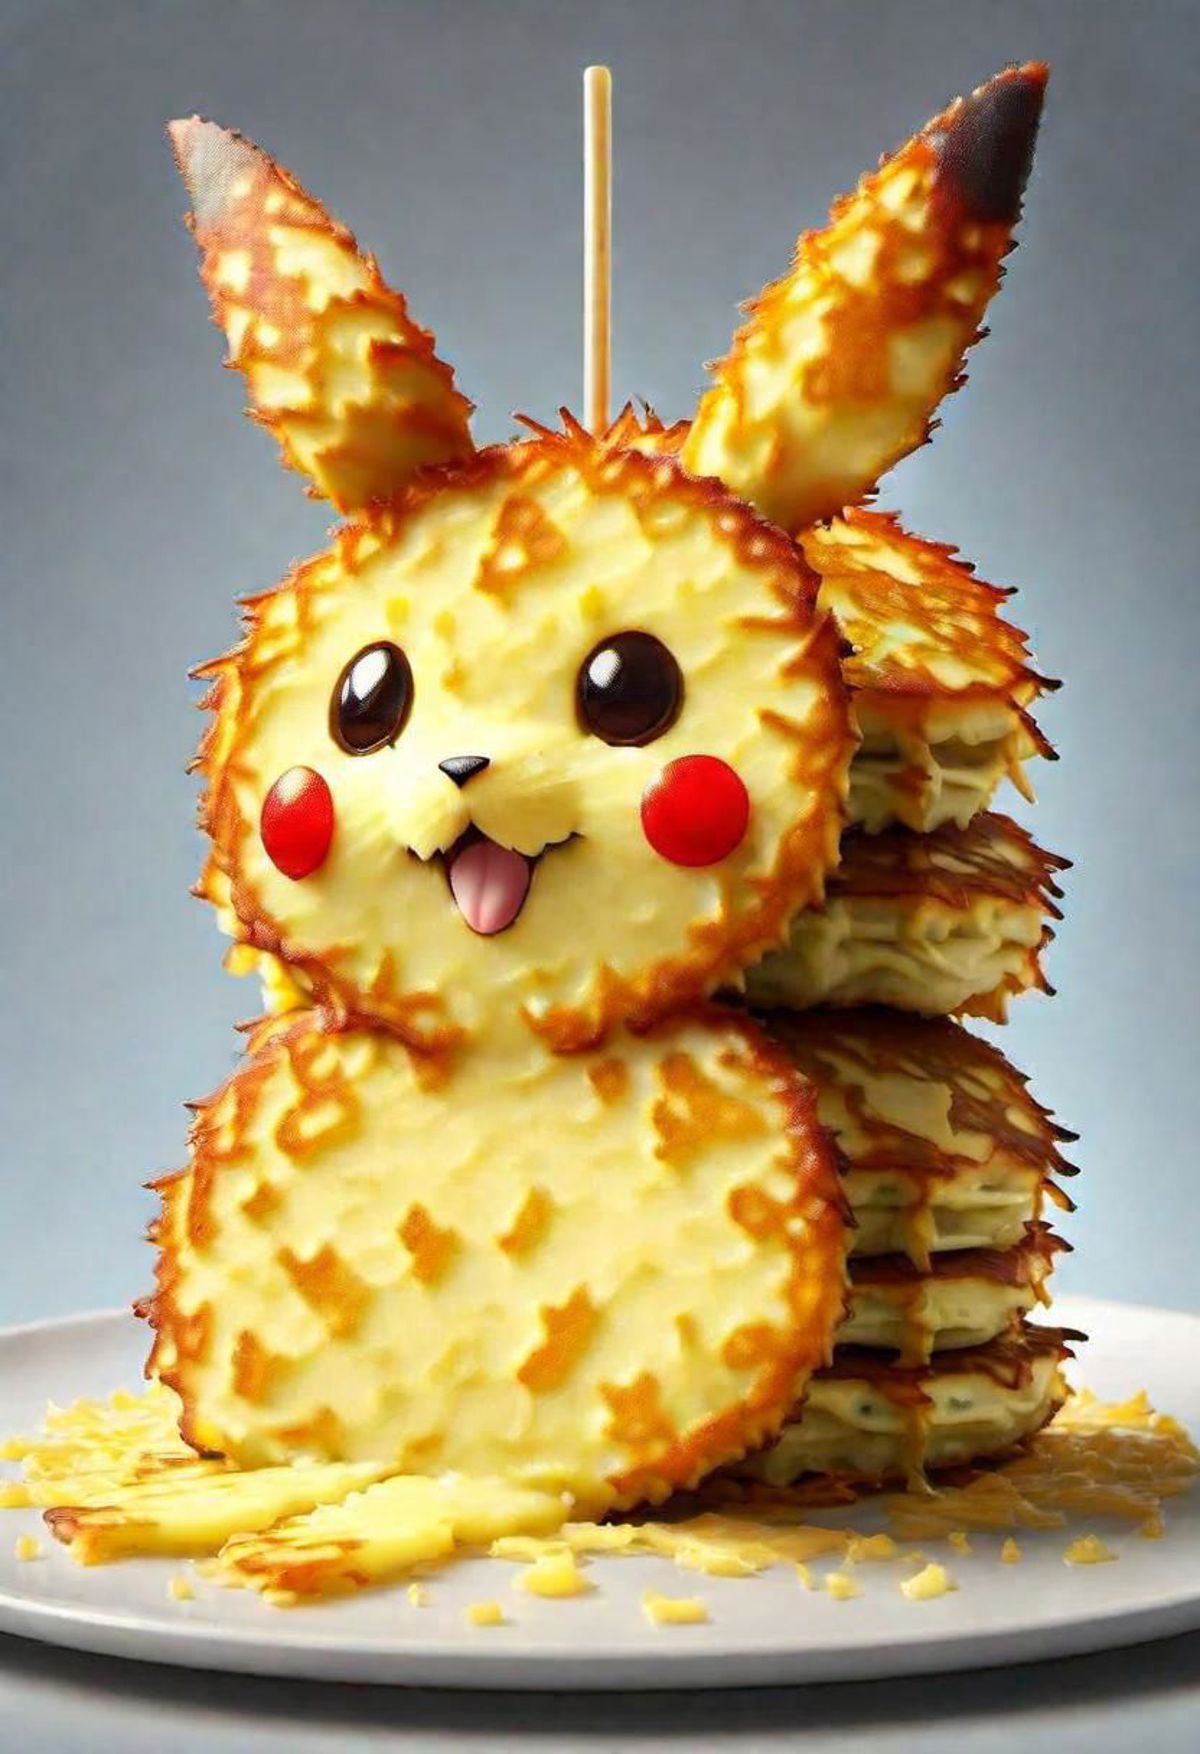 A stack of pancakes shaped like a Pikachu from Pokemon.